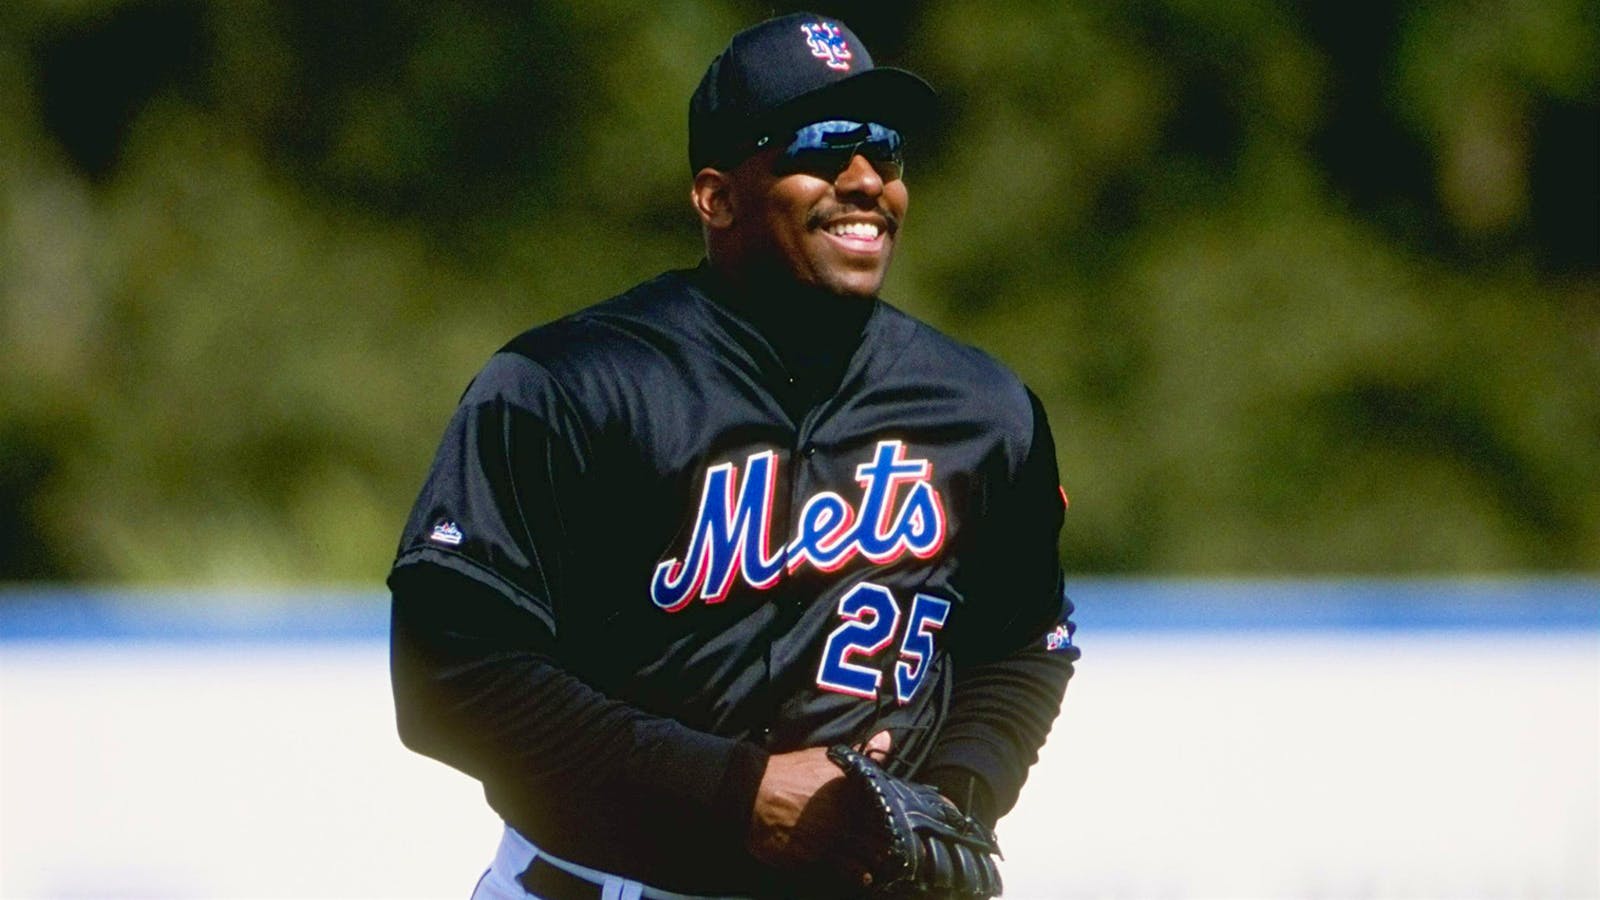 Mets to wear black jerseys on July 30 and remaining Friday night